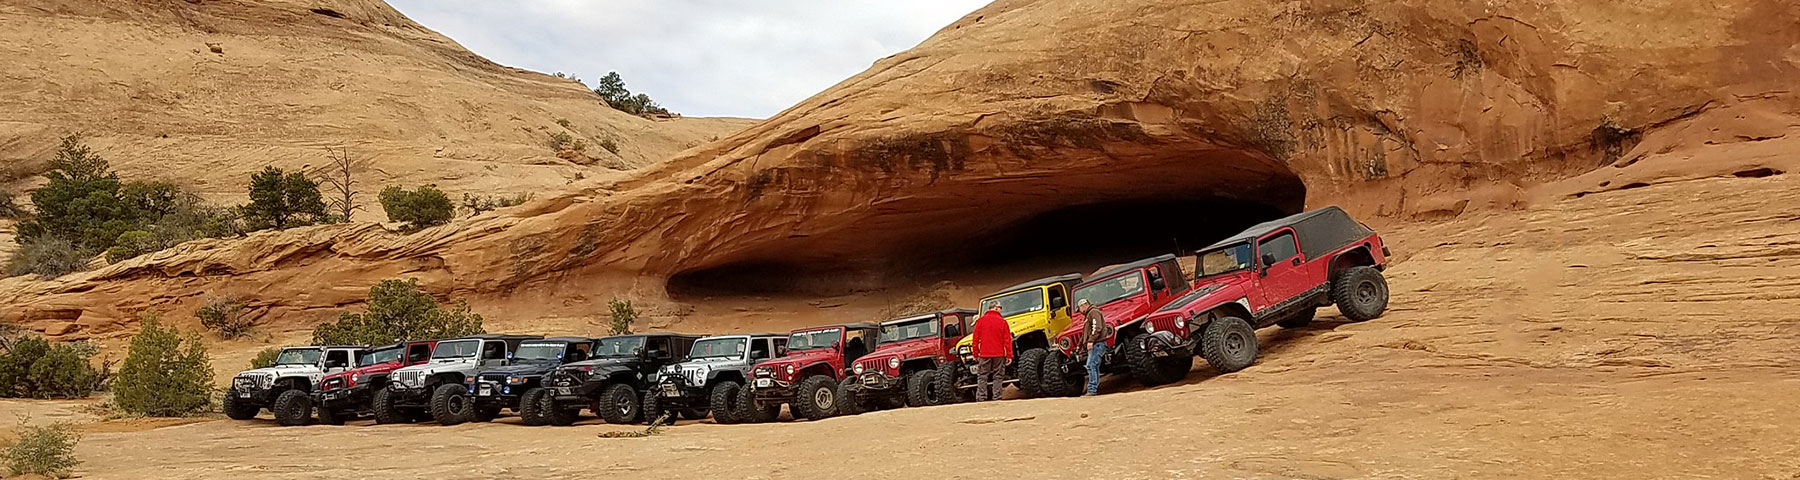 Moab Expedition